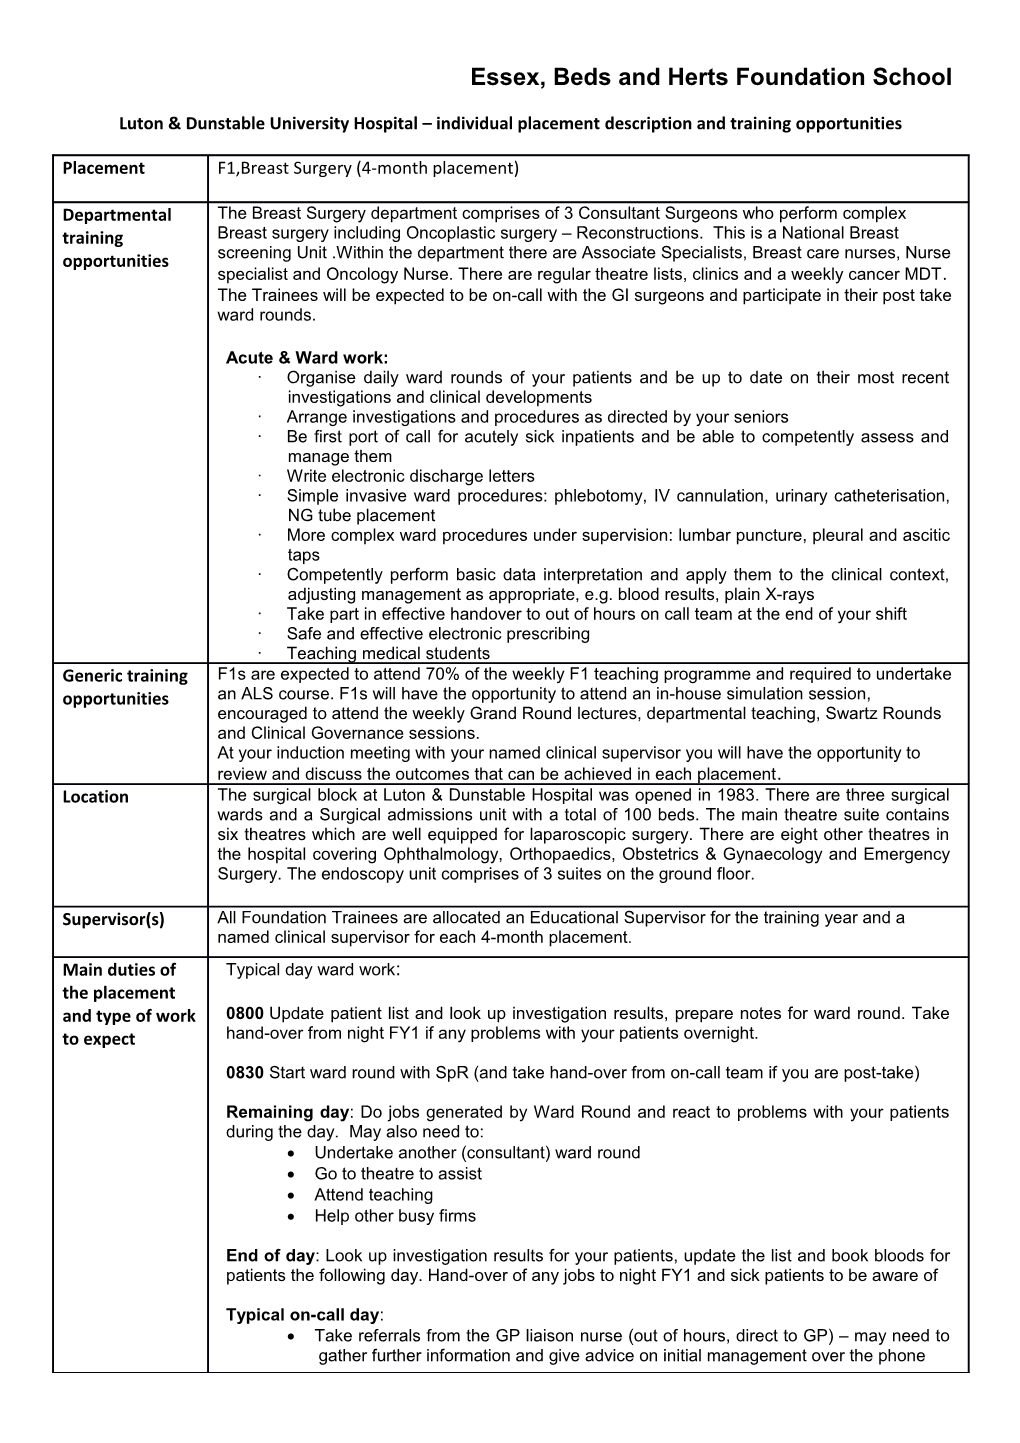 Luton & Dunstableuniversityhospital Individual Placement Description and Training Opportunities